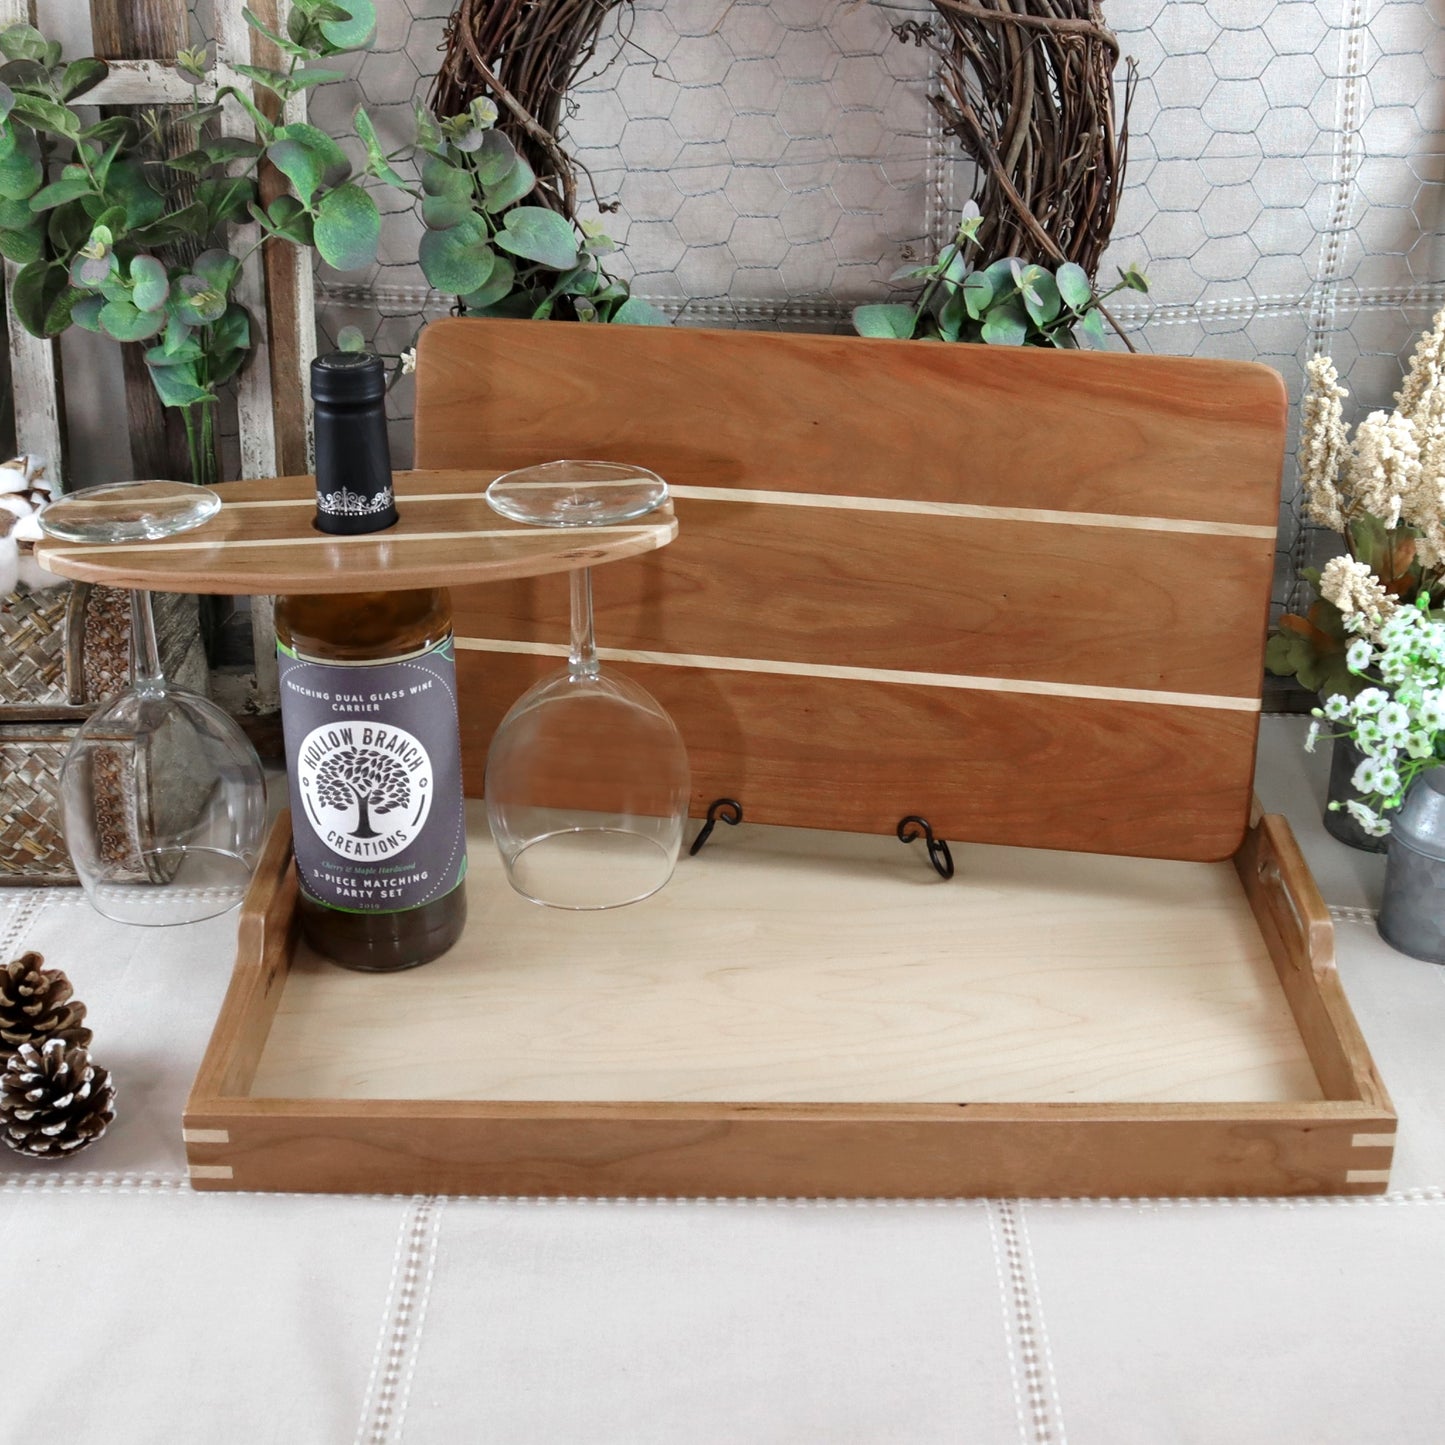 3-PC Cherry Tray, Cutting Board, & Wine Carrier